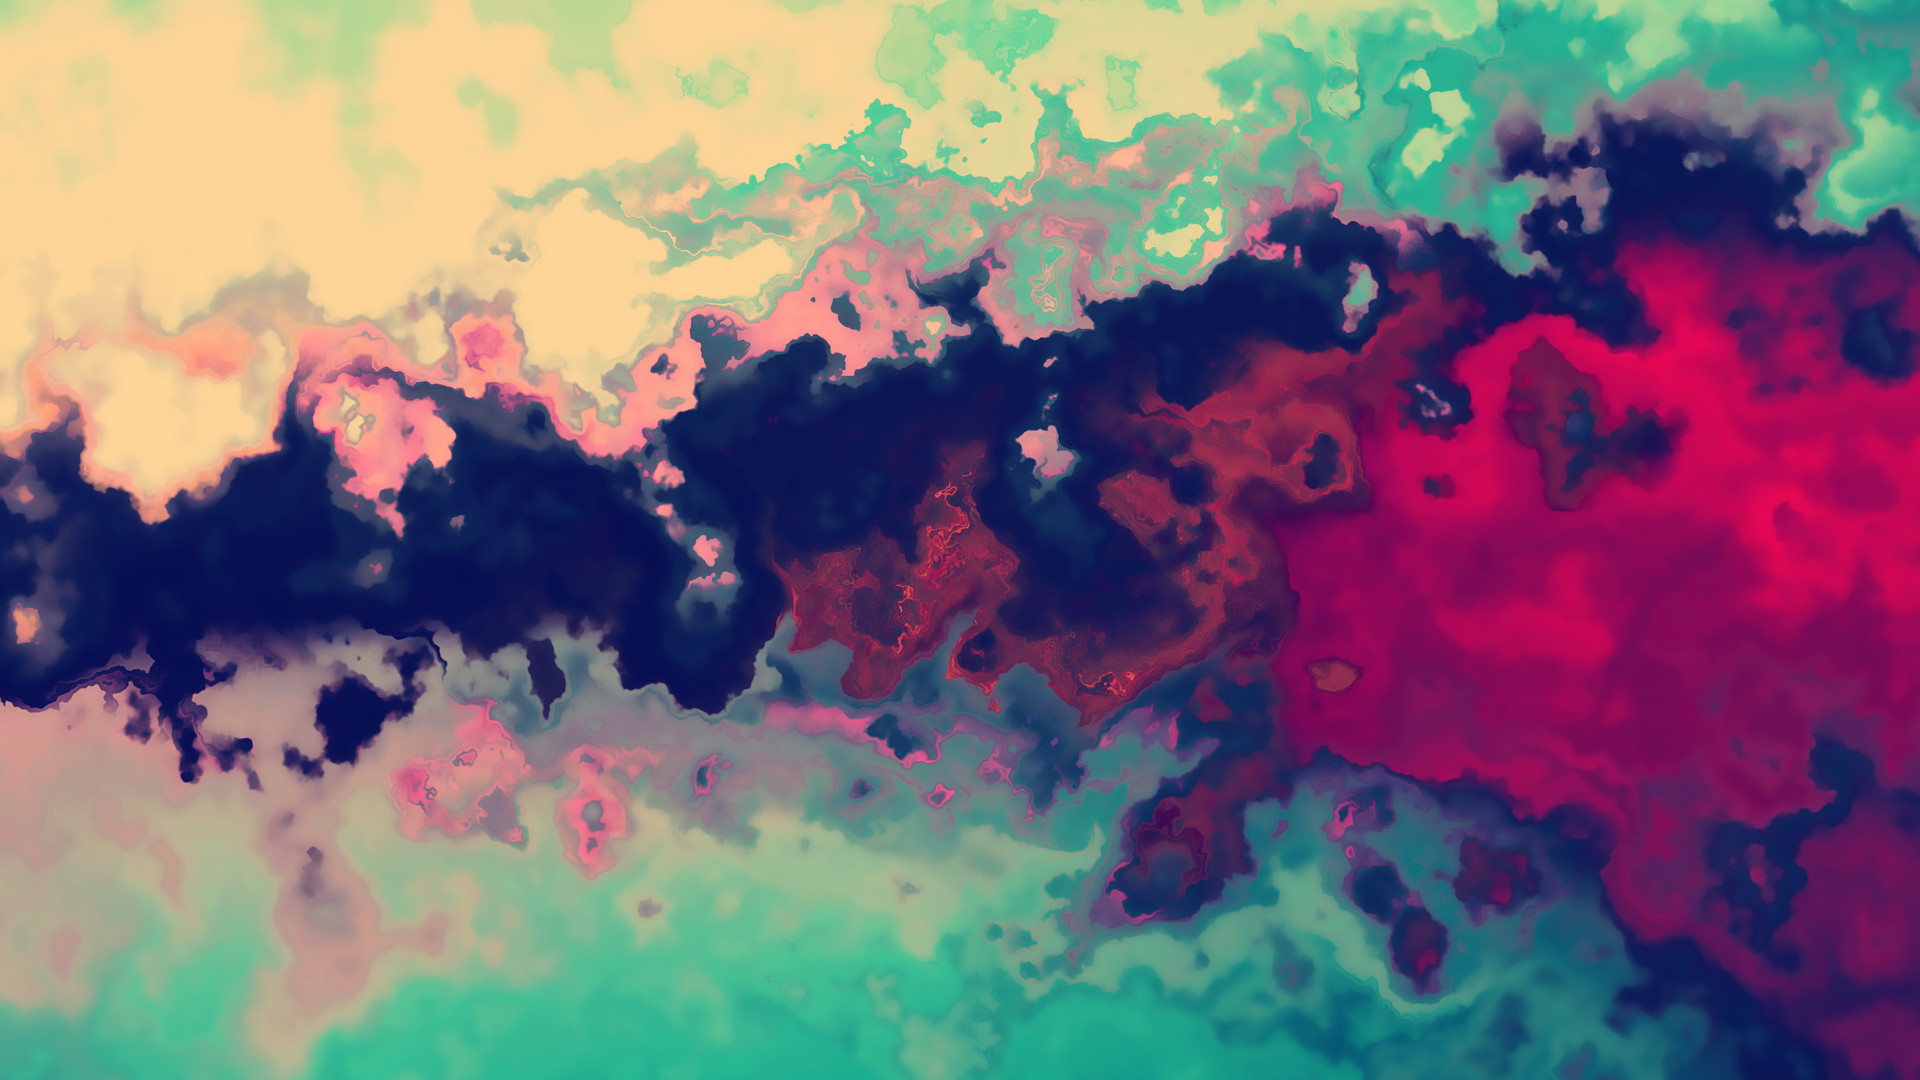 1920x1080 KHF-19: Psychedelic Wallpapers for Desktop